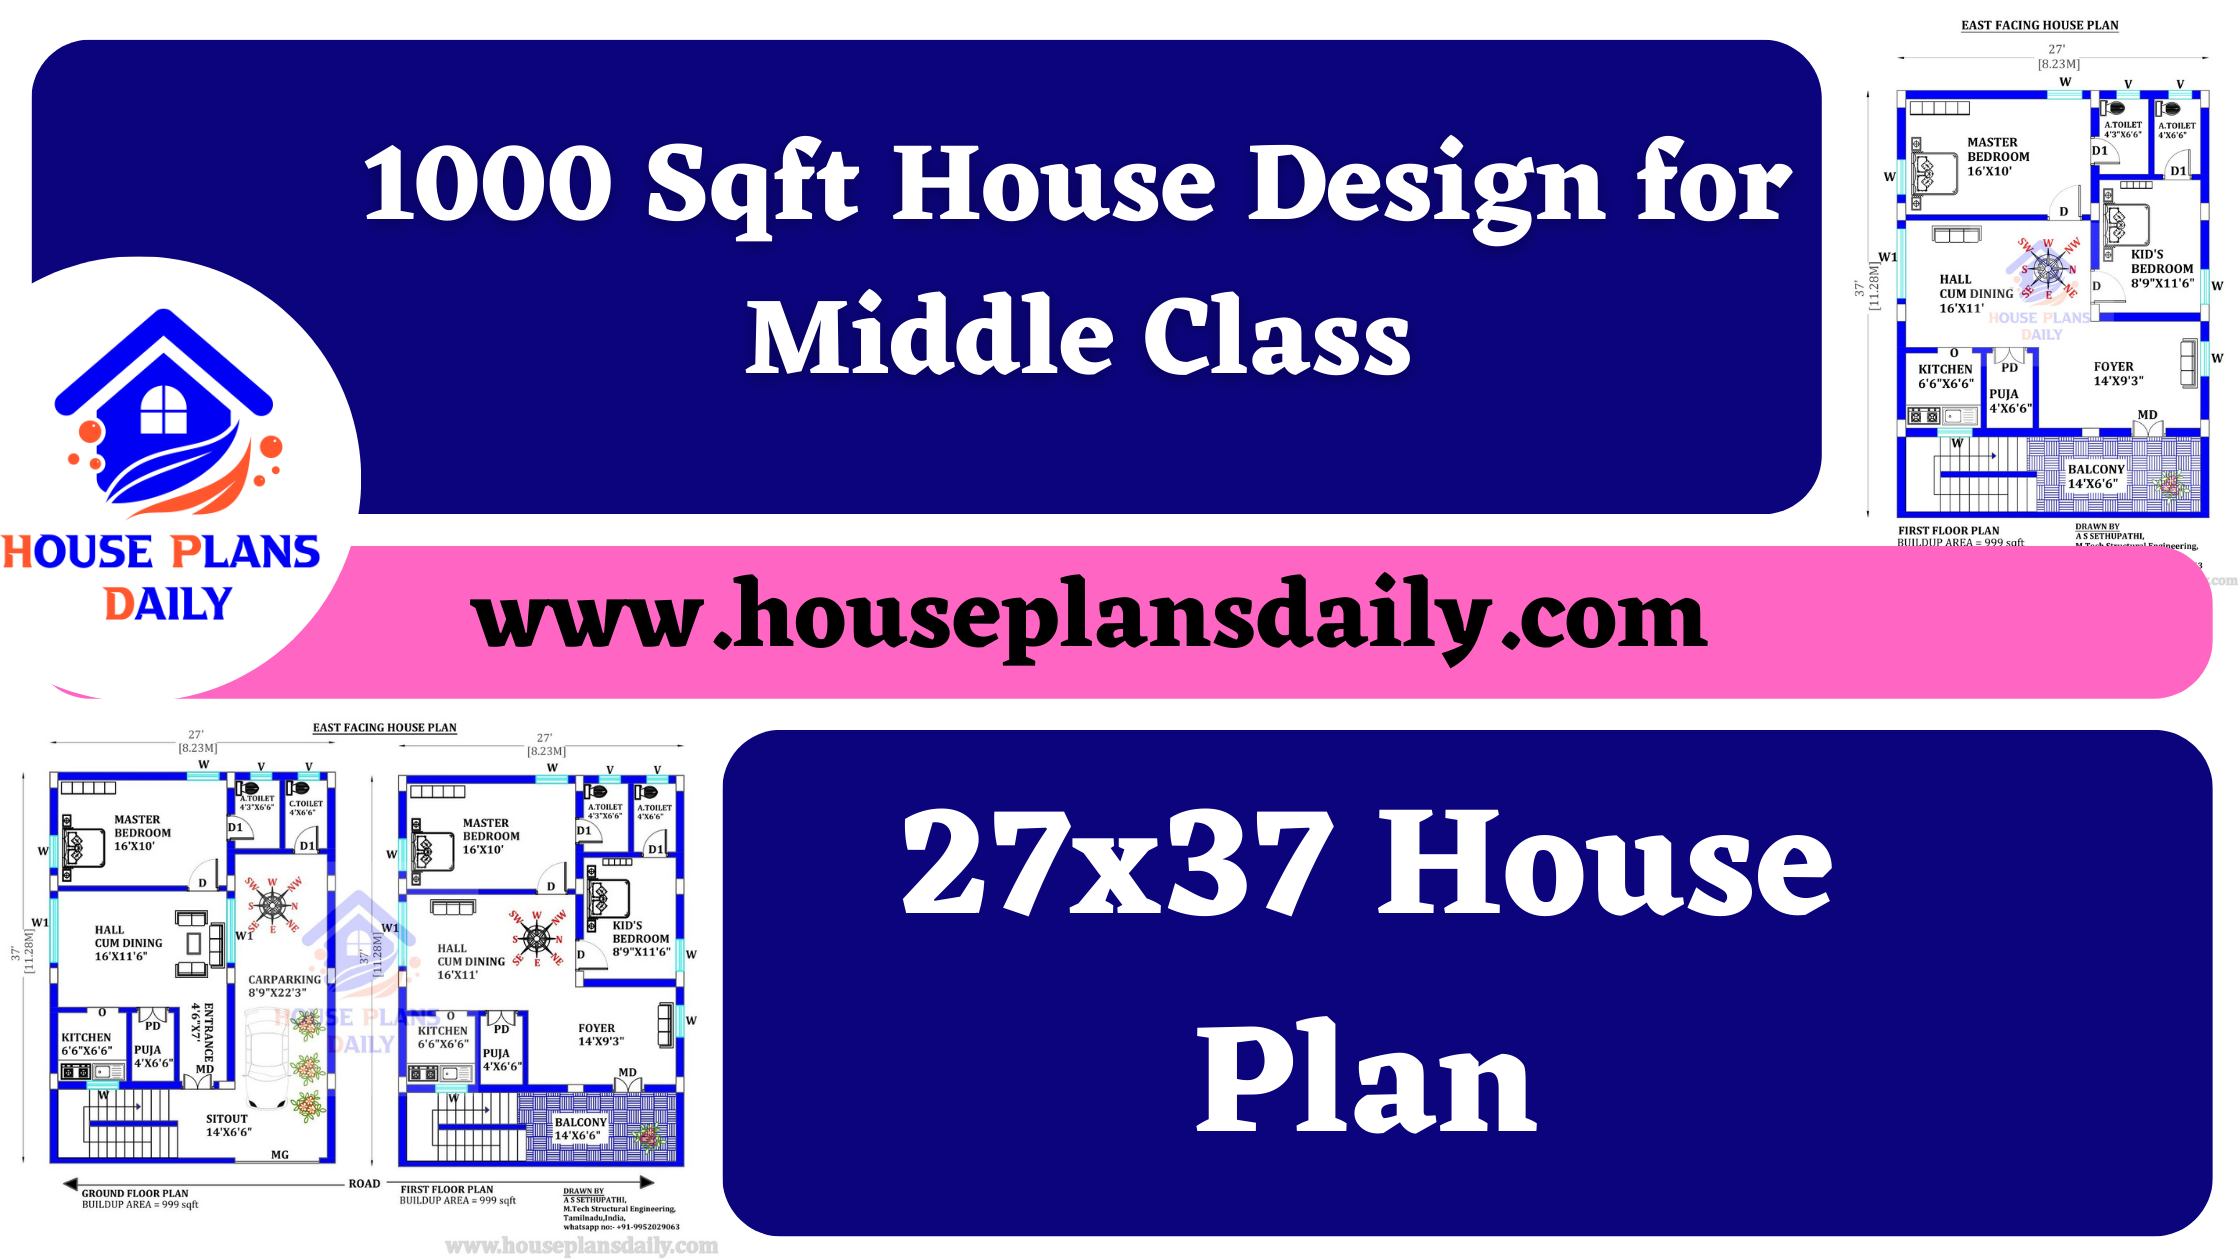 1000 Sqft House Design for Middle Class | 27x37 House Plan